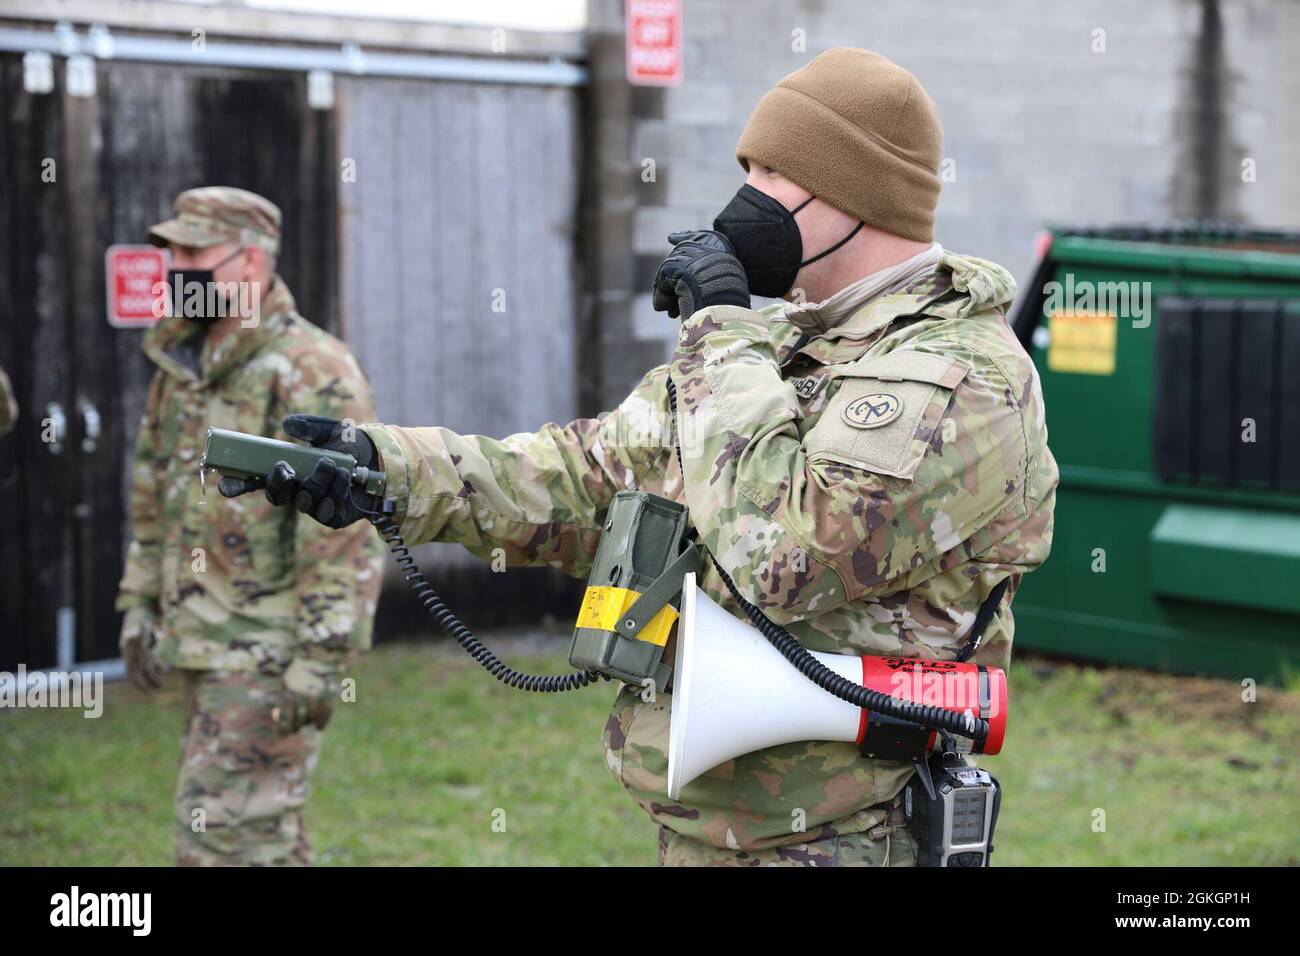 Spc. Raymond Faltisco, a combat engineer assigned to Bravo Company, 152nd Brigade Engineer Battalion of the New York Army National Guard, practices scanning for hazards while calling out to victims during a Homeland Response Force collective training exercise in East Amherst, New York on April 17. Faltisco and his unit are assigned to the FEMA Region II HRF's search and extraction element, tasked with rescuing victims during natural and manmade disasters. Stock Photo